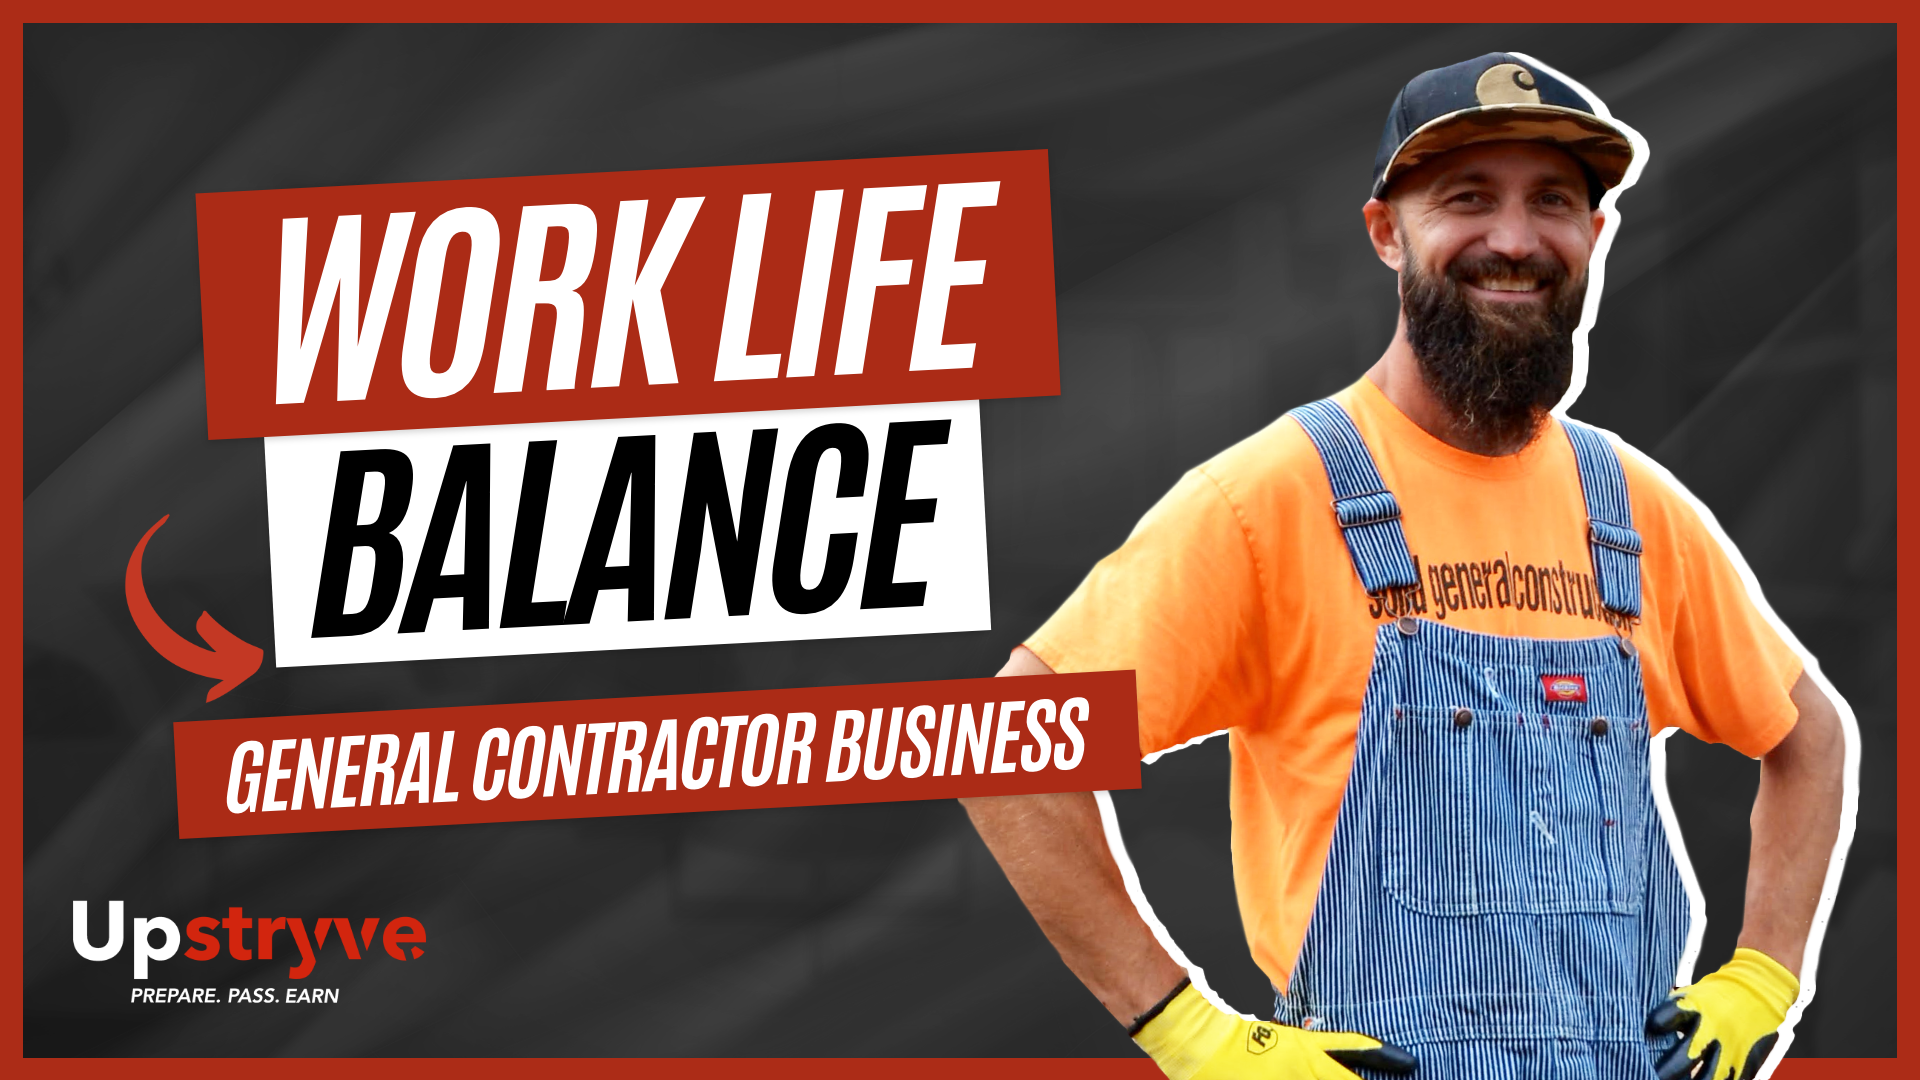 Nick Bossio is a man of many skills and passions. He is a father, husband, general contractor, musician and so much more. In today's vide he explains the importance of work life balance as a general contractor which is a topic not many talk about. Tradespeople are constantly working and on the go which makes Nick's business structure and journey unique. If you've been trying to find pro tips on how to improve your work life balance this video is for you.